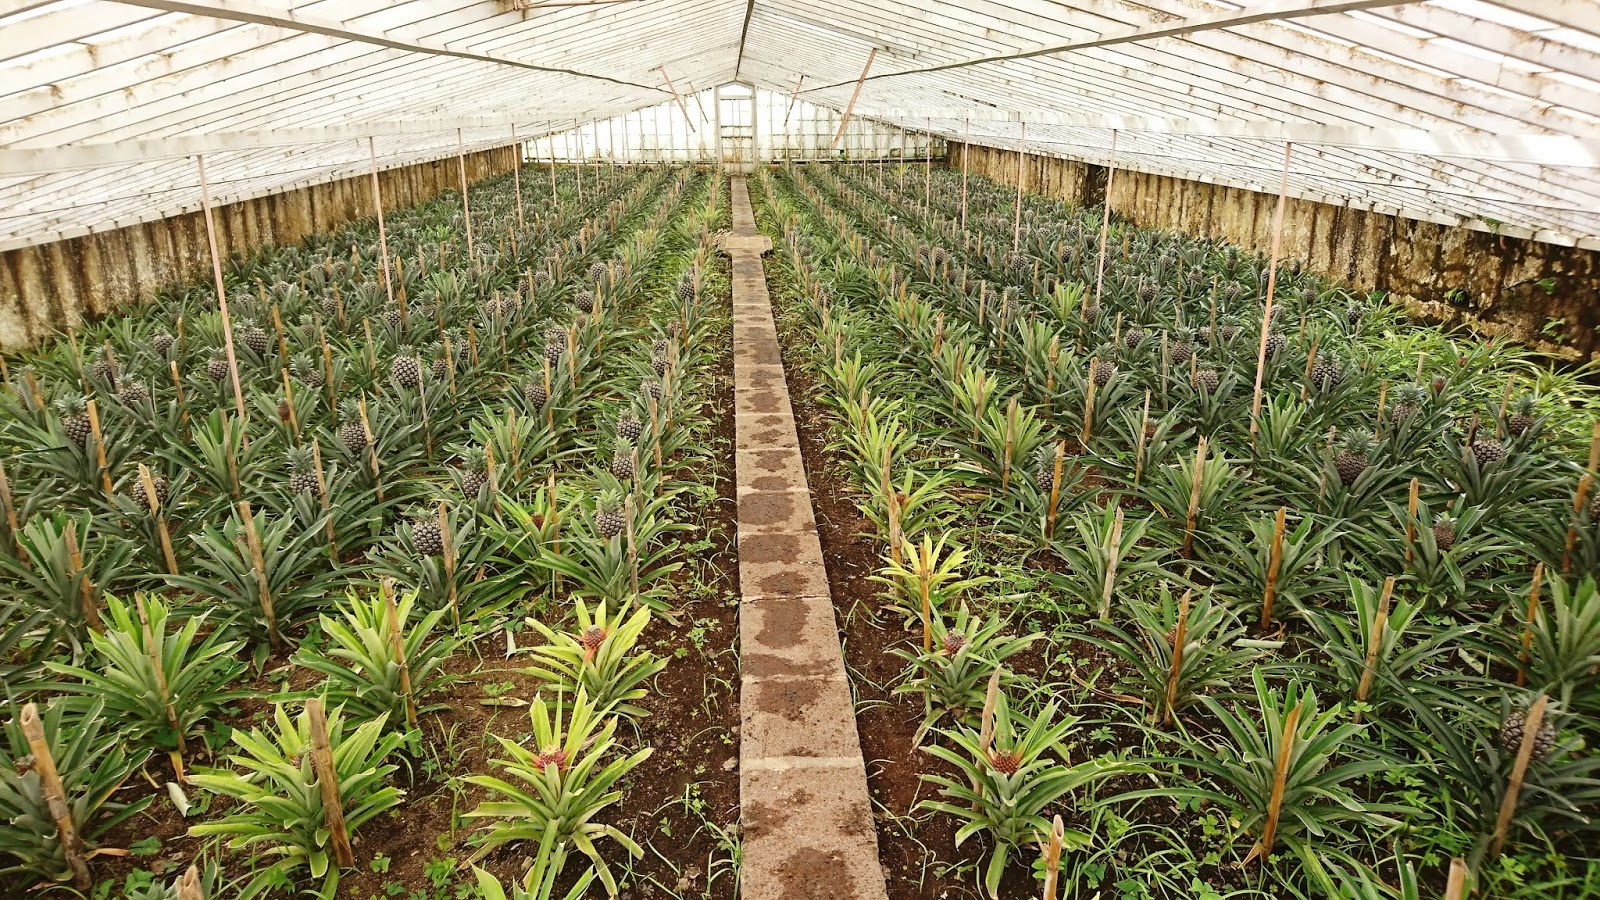 Pineapple production